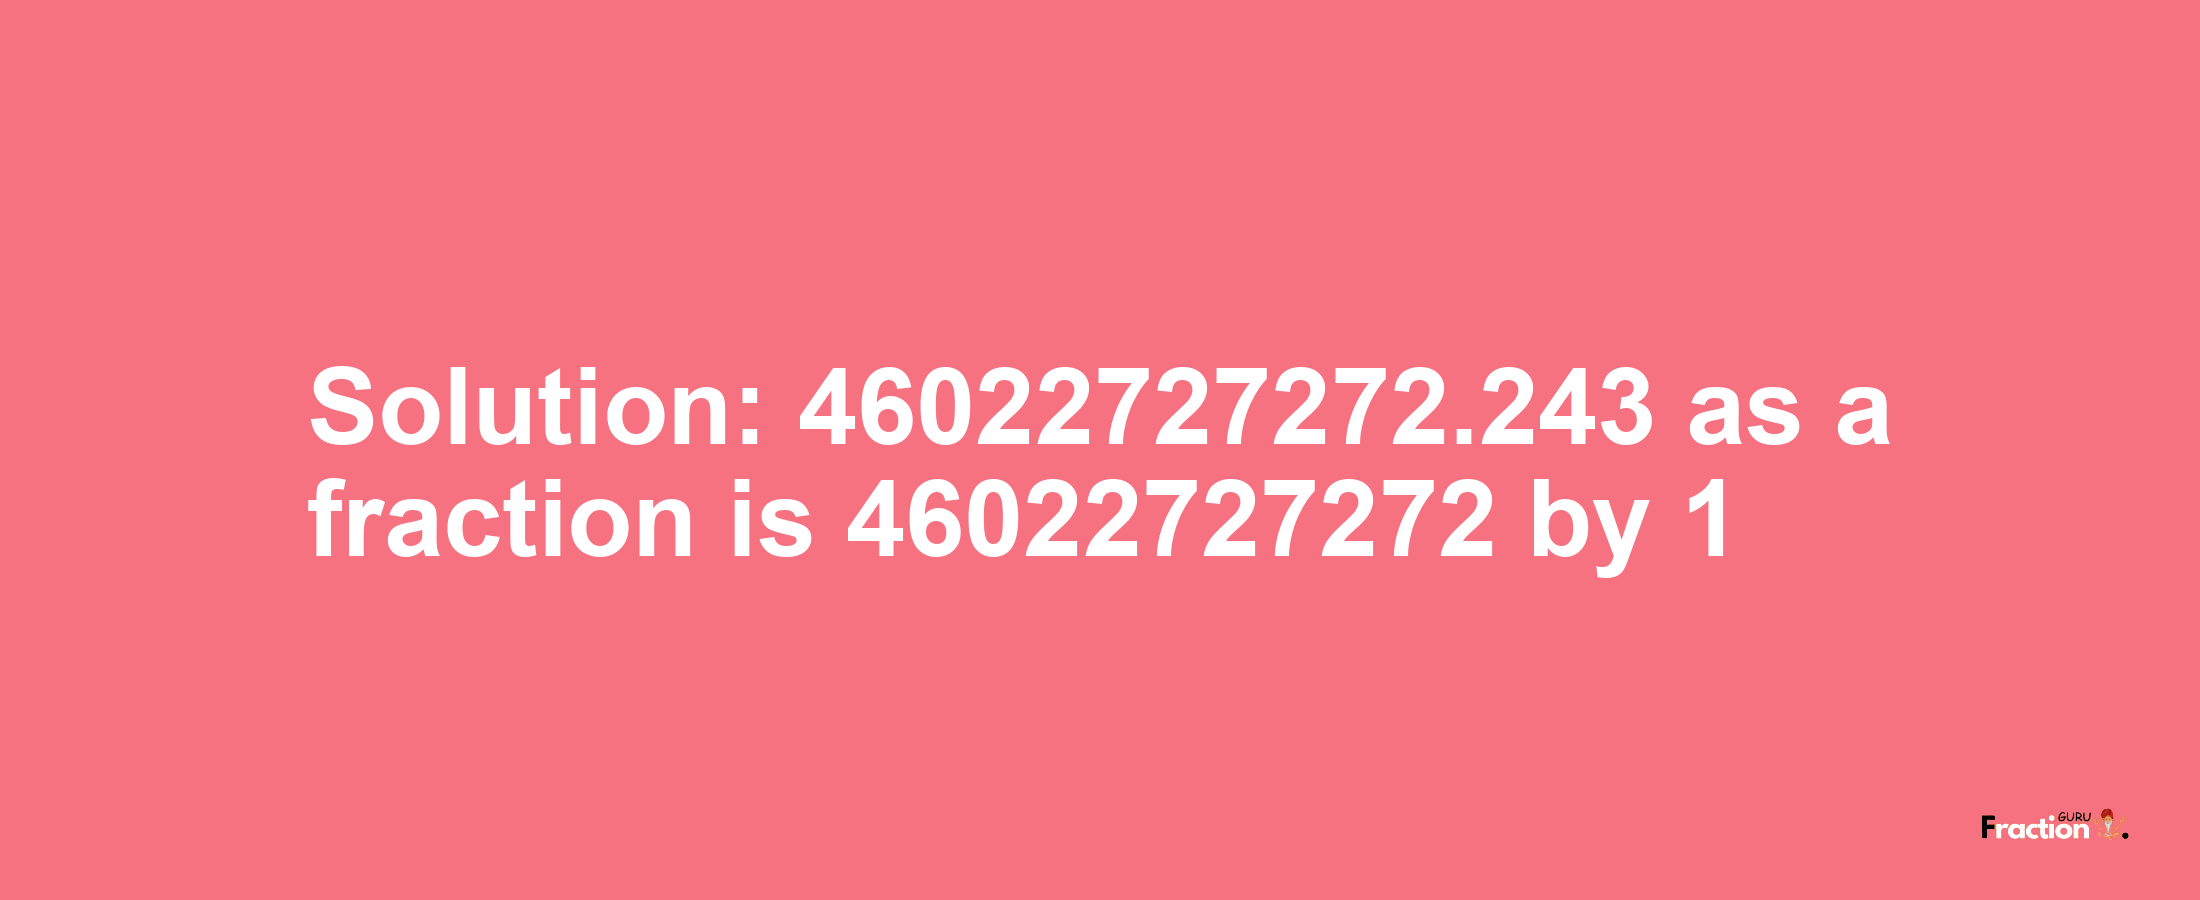 Solution:46022727272.243 as a fraction is 46022727272/1